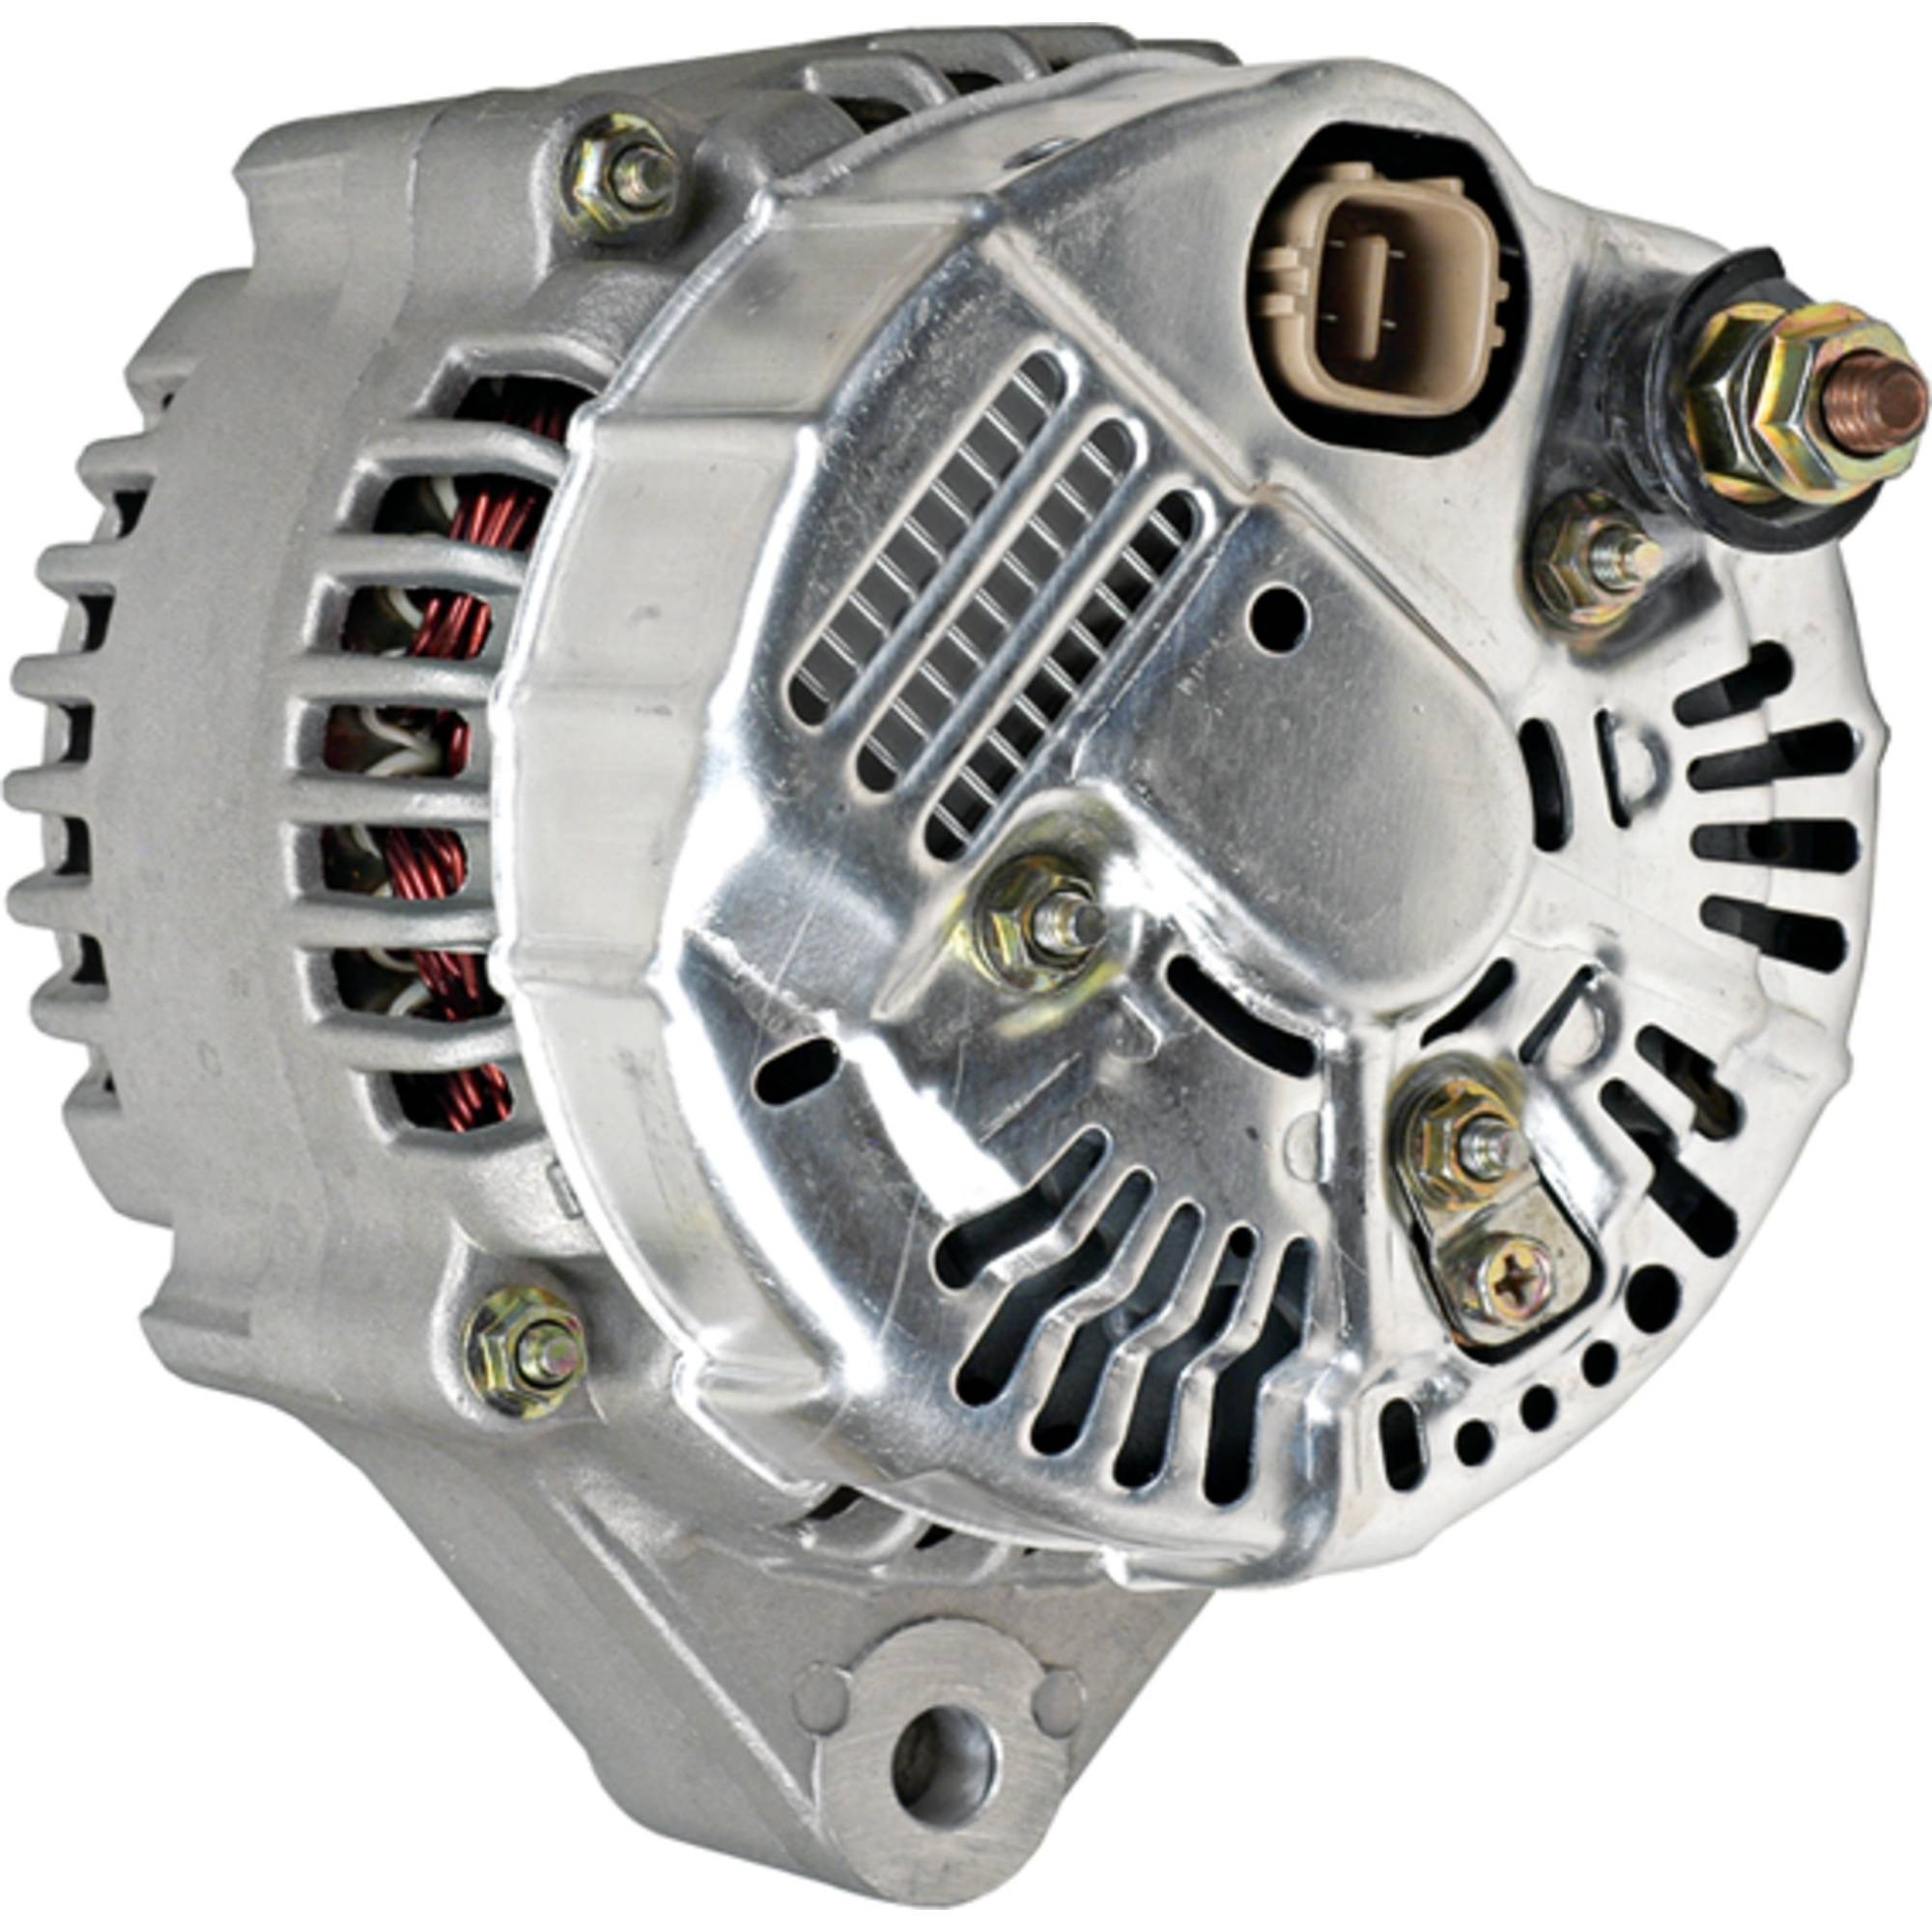 DB Electrical Alternator for 3.2L Acura Cl 2001-2003, Tl 1999-2003 31100-P8E-A01; AND0267